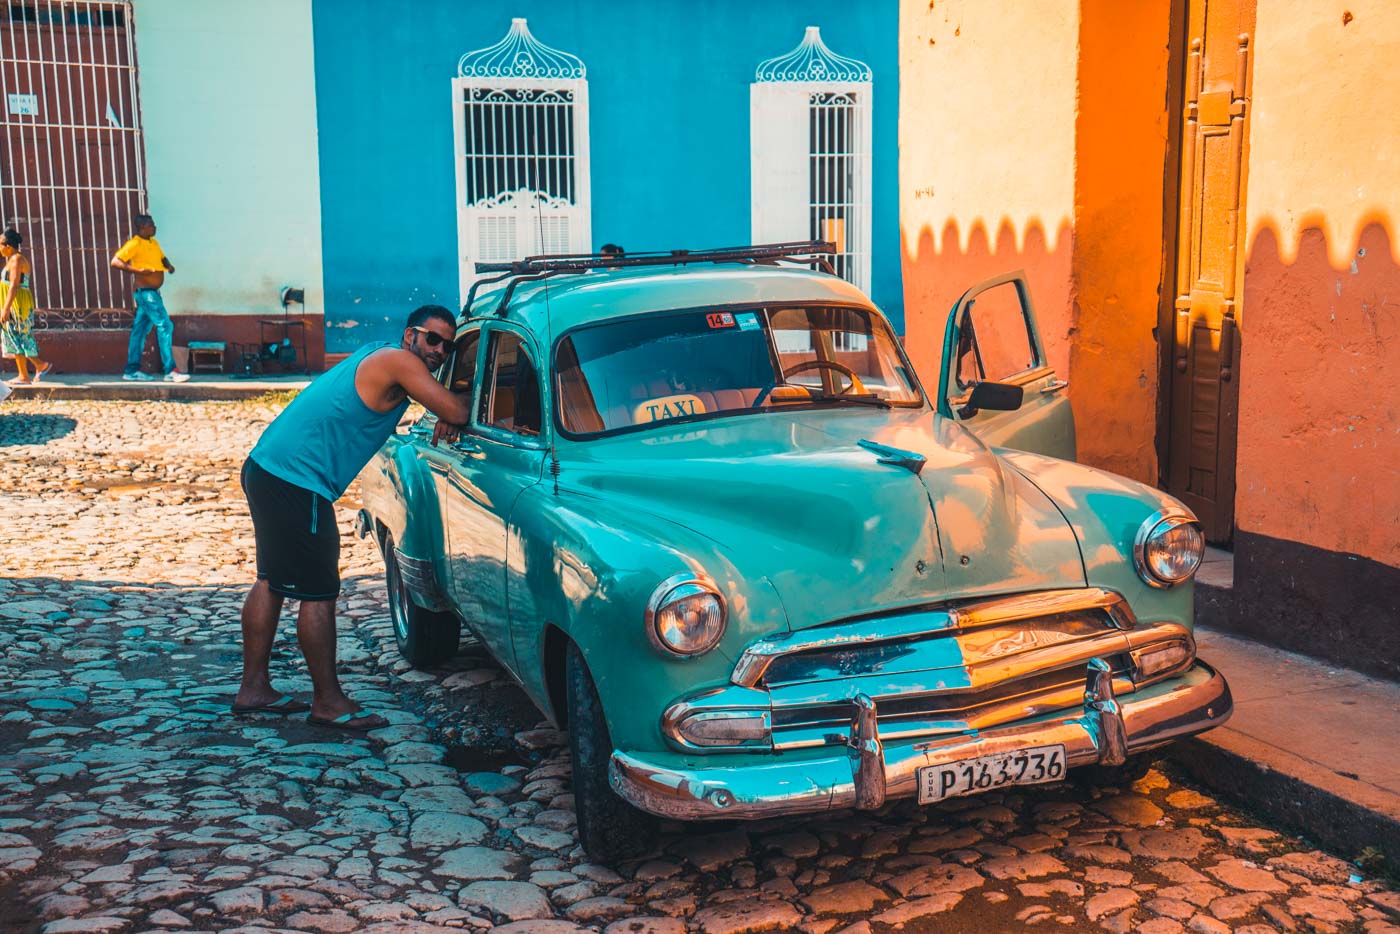 20 Interesting Facts About Cuba You Need to Know Before Your Trip